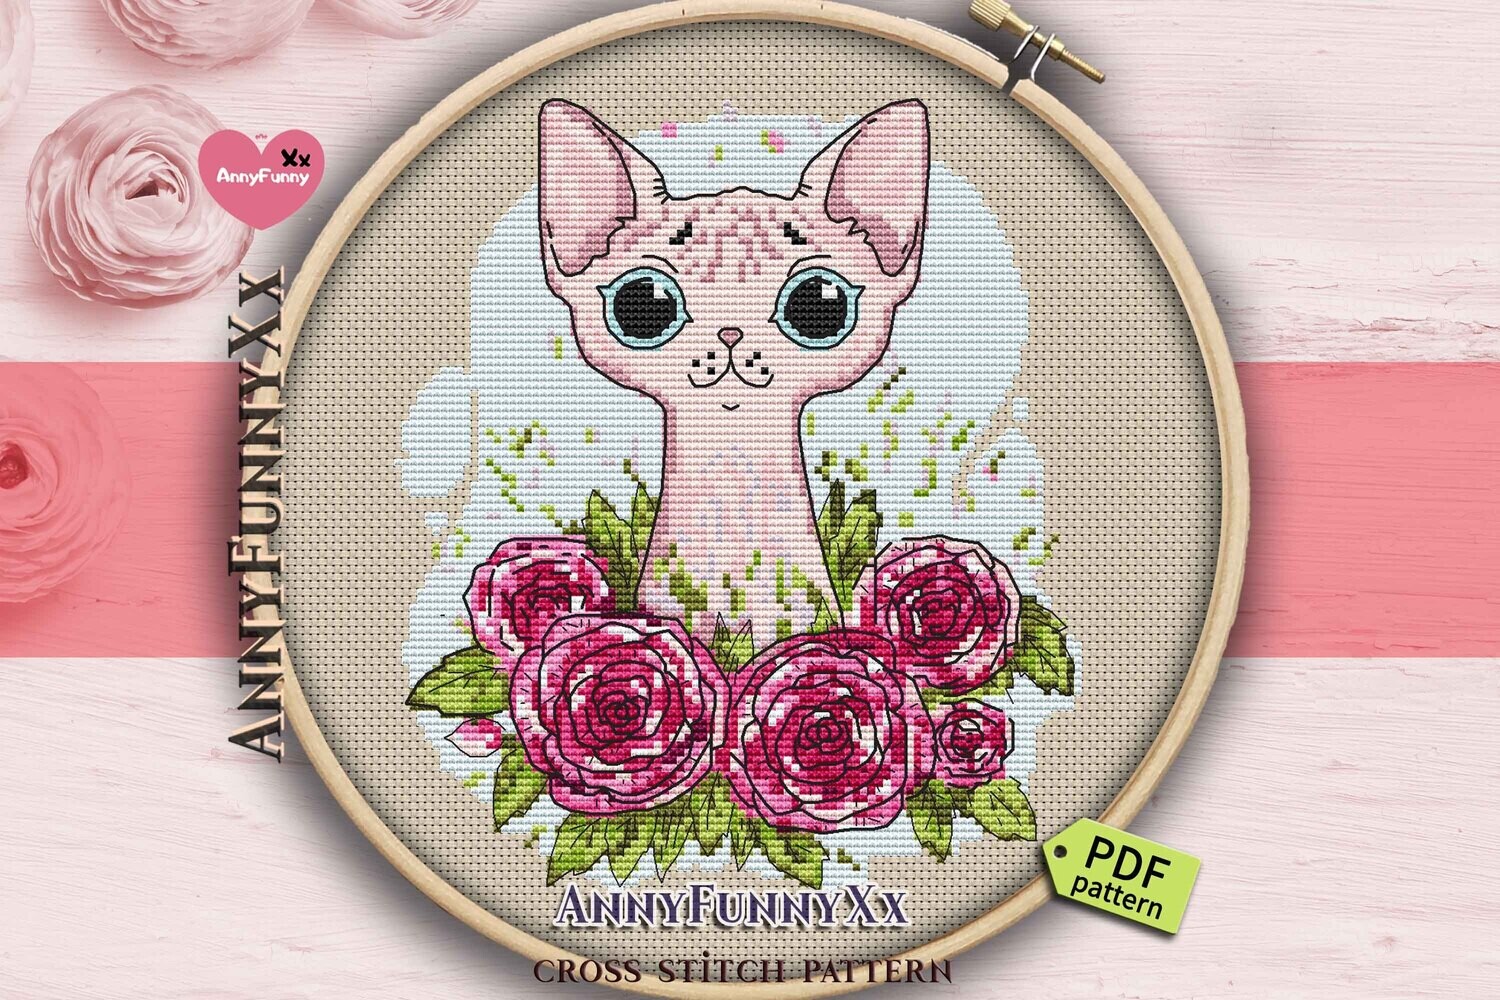 Sphynx cat Cross stitch pattern PDF Hairless cat cr Occult Cross-Stitch embroidery design Kitty in flowers